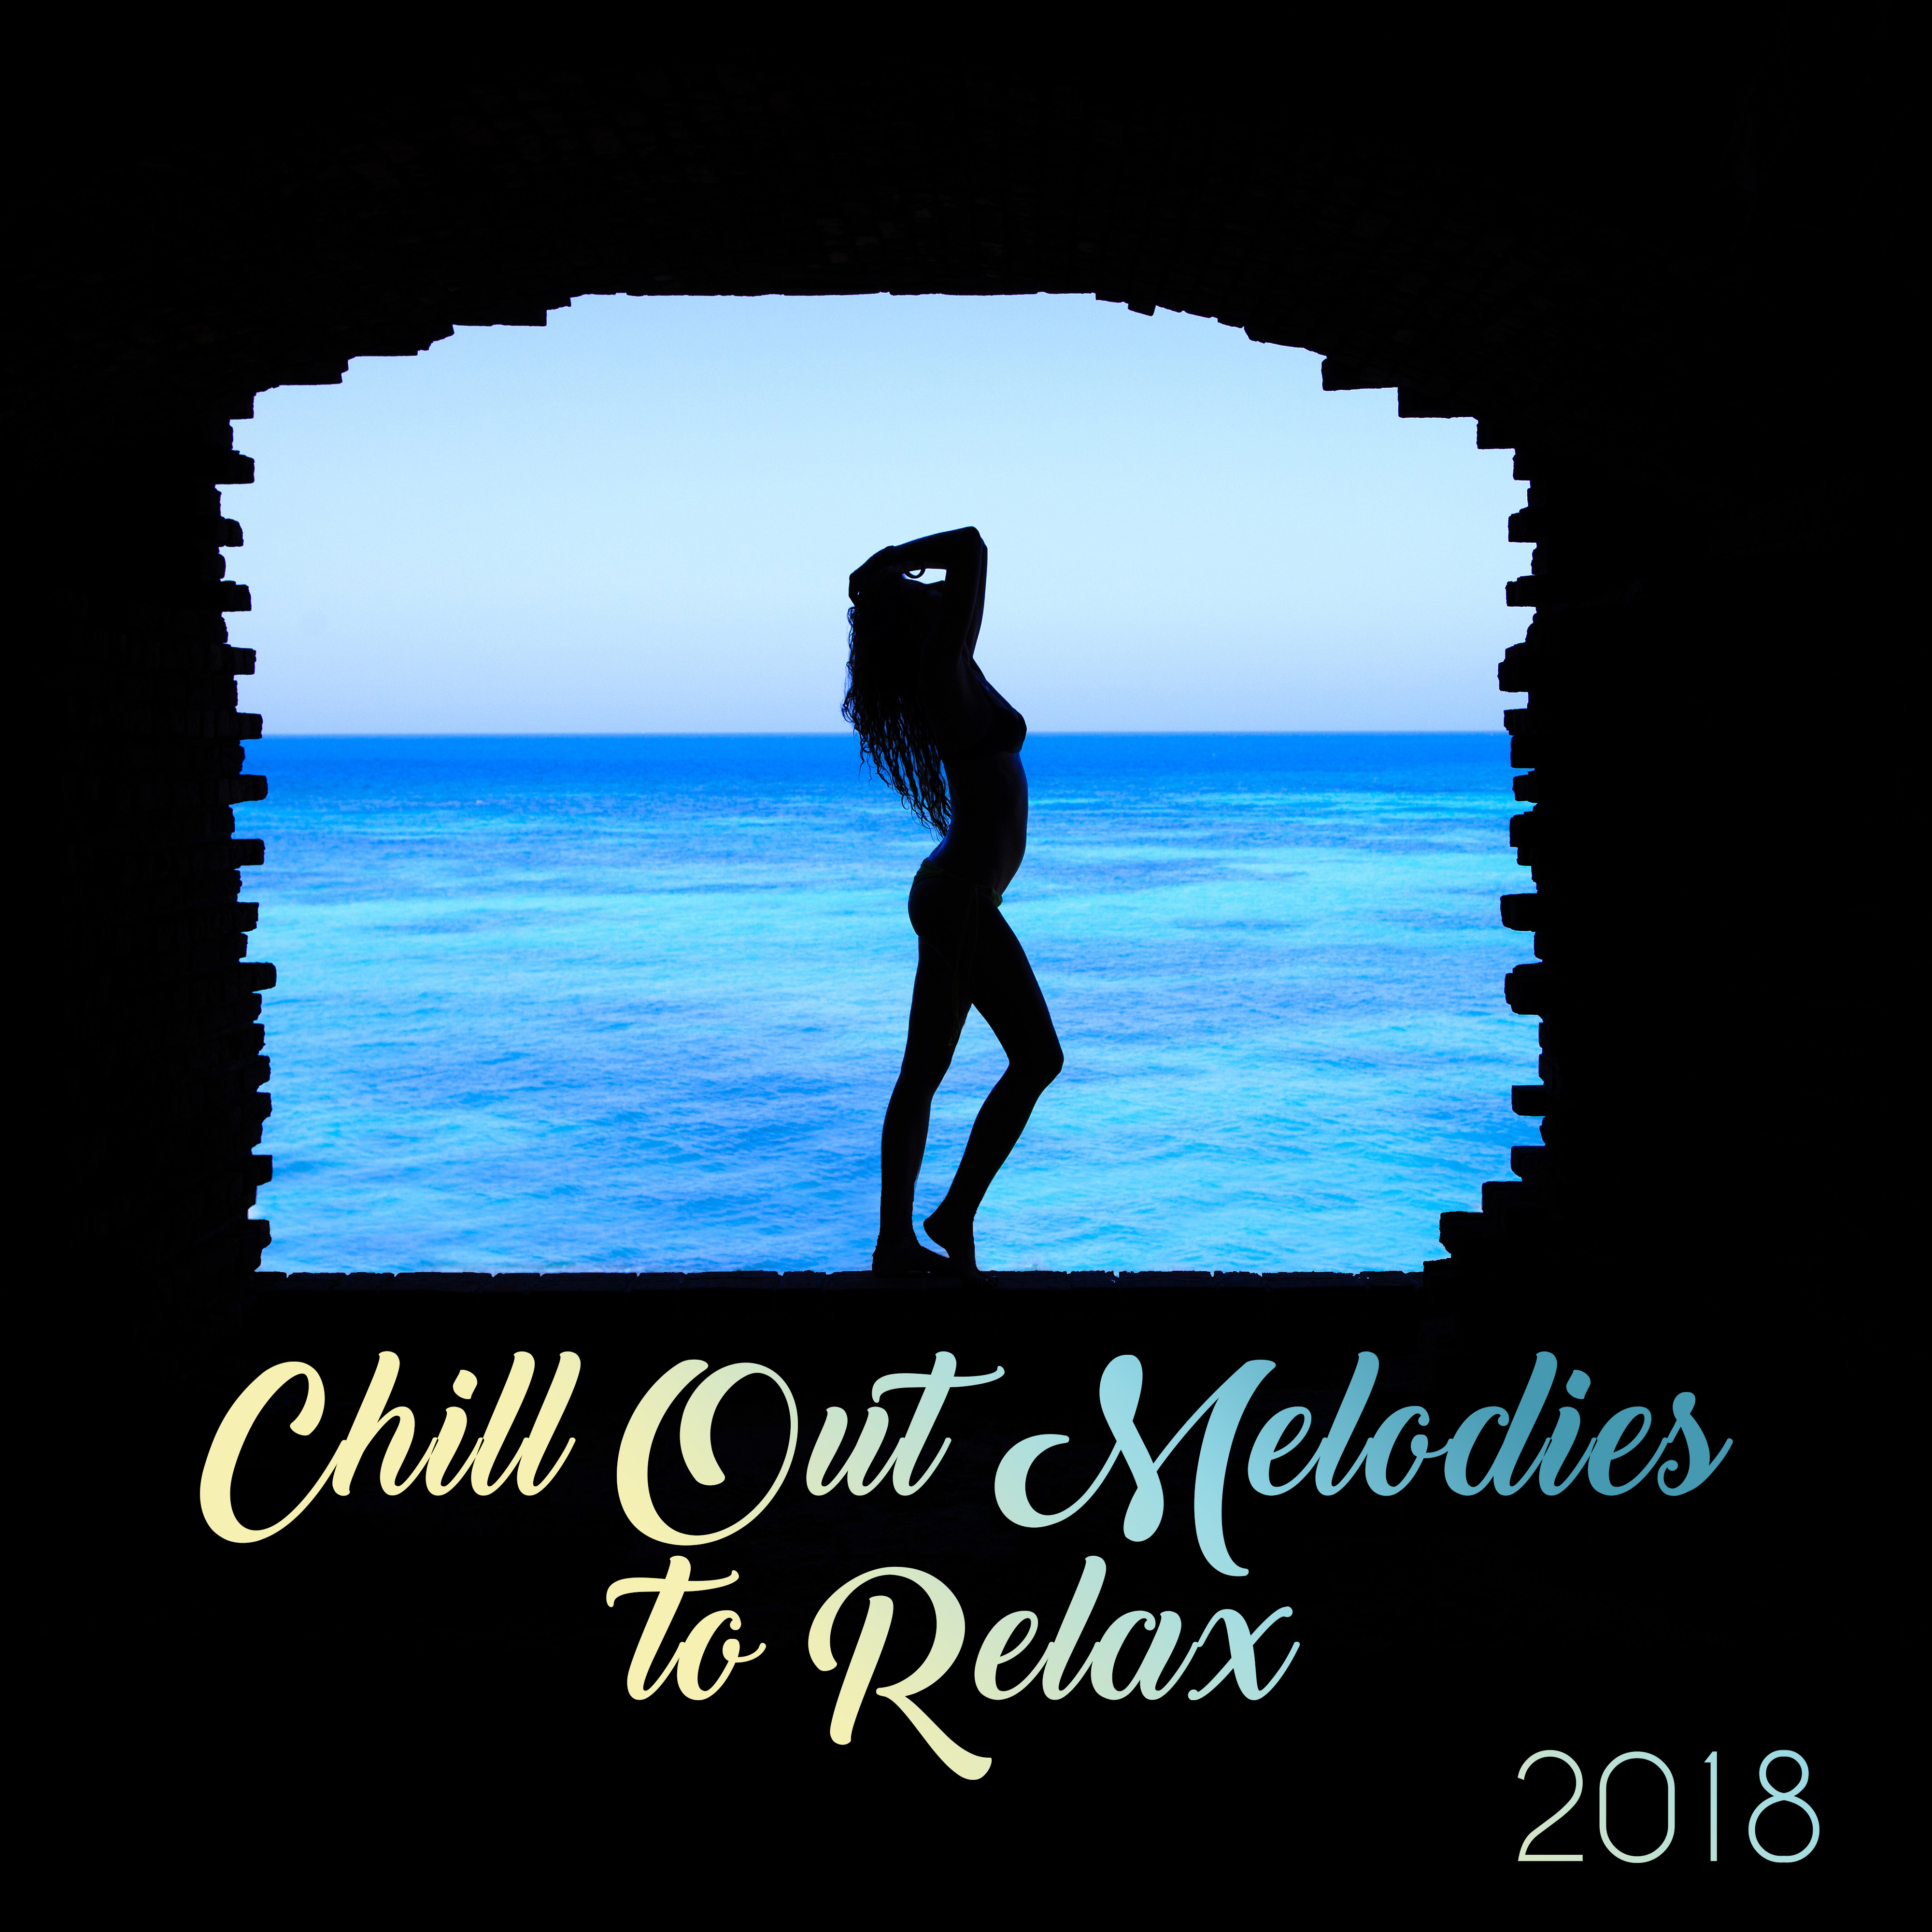 Chill Out Melodies to Relax 2018